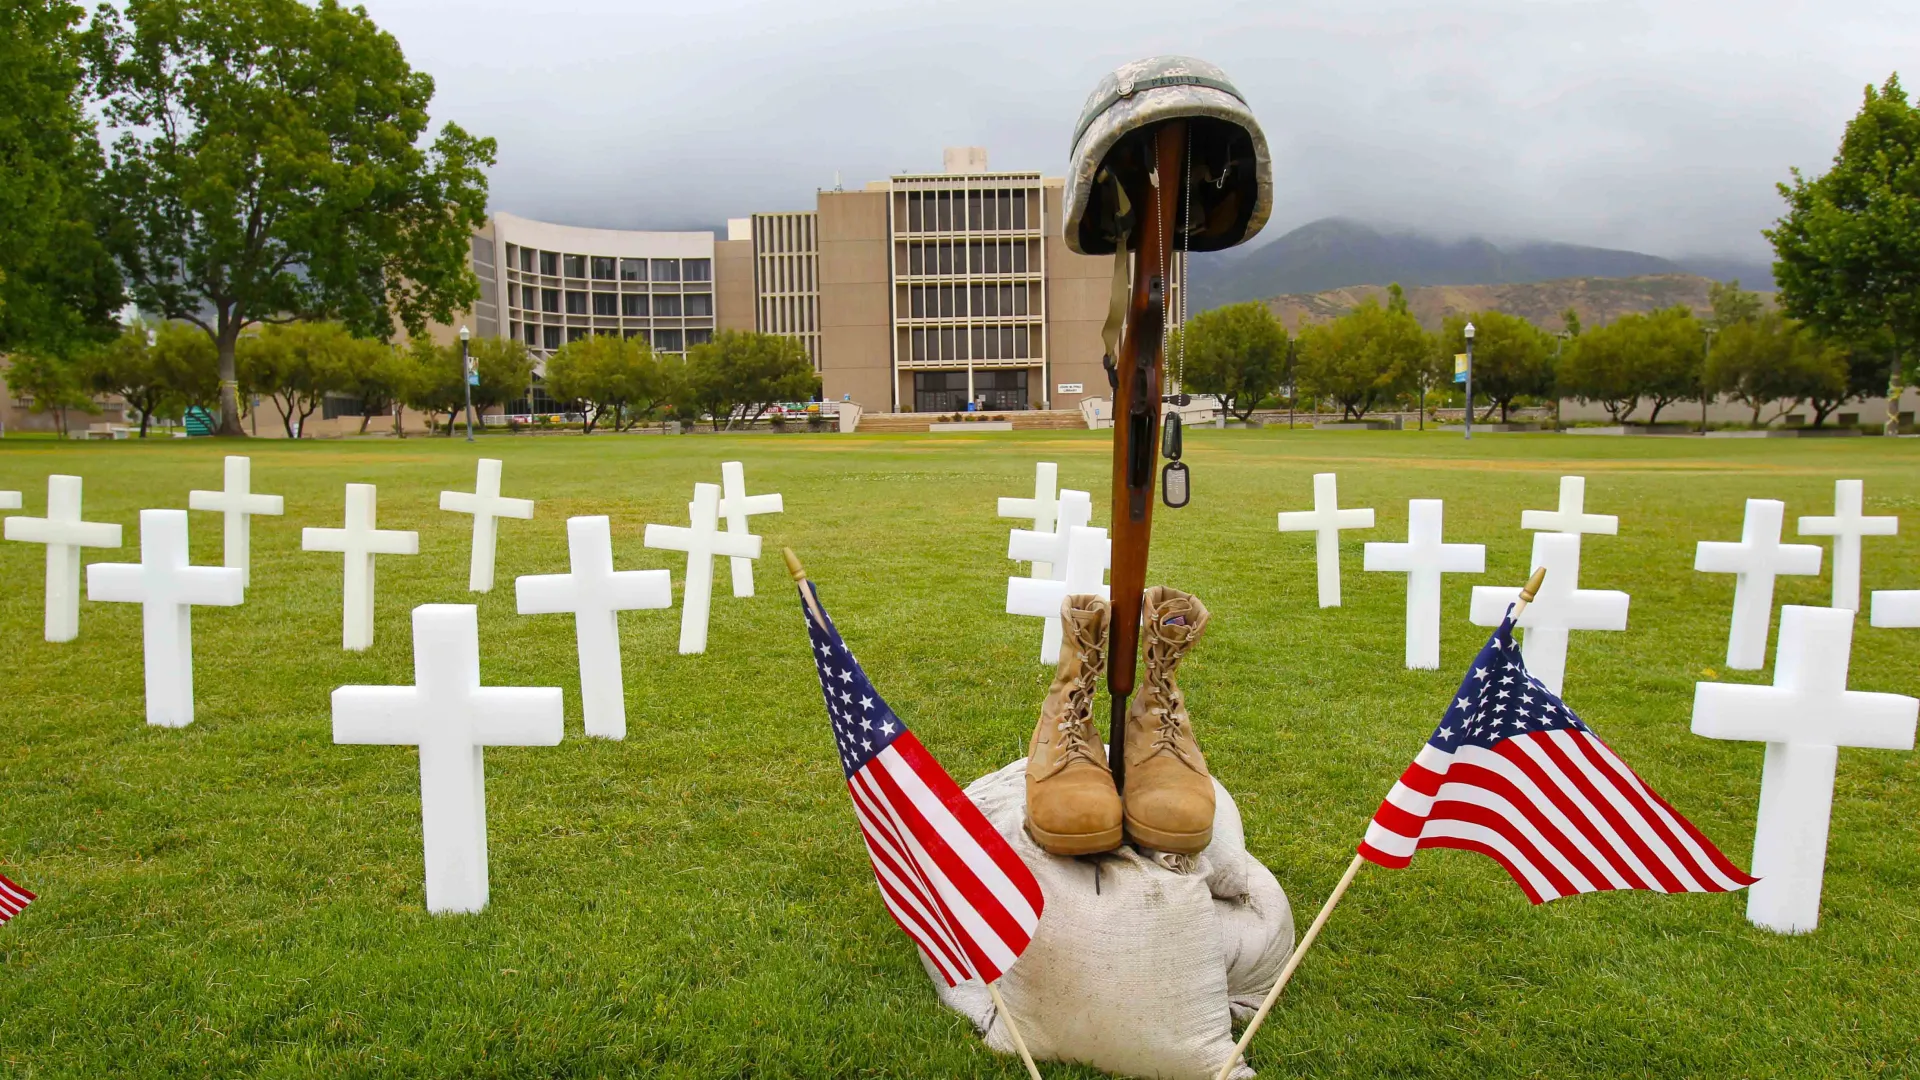 Rifle, helmet, boots, flags and crosses from a Memorial Day event on campus, file photo.